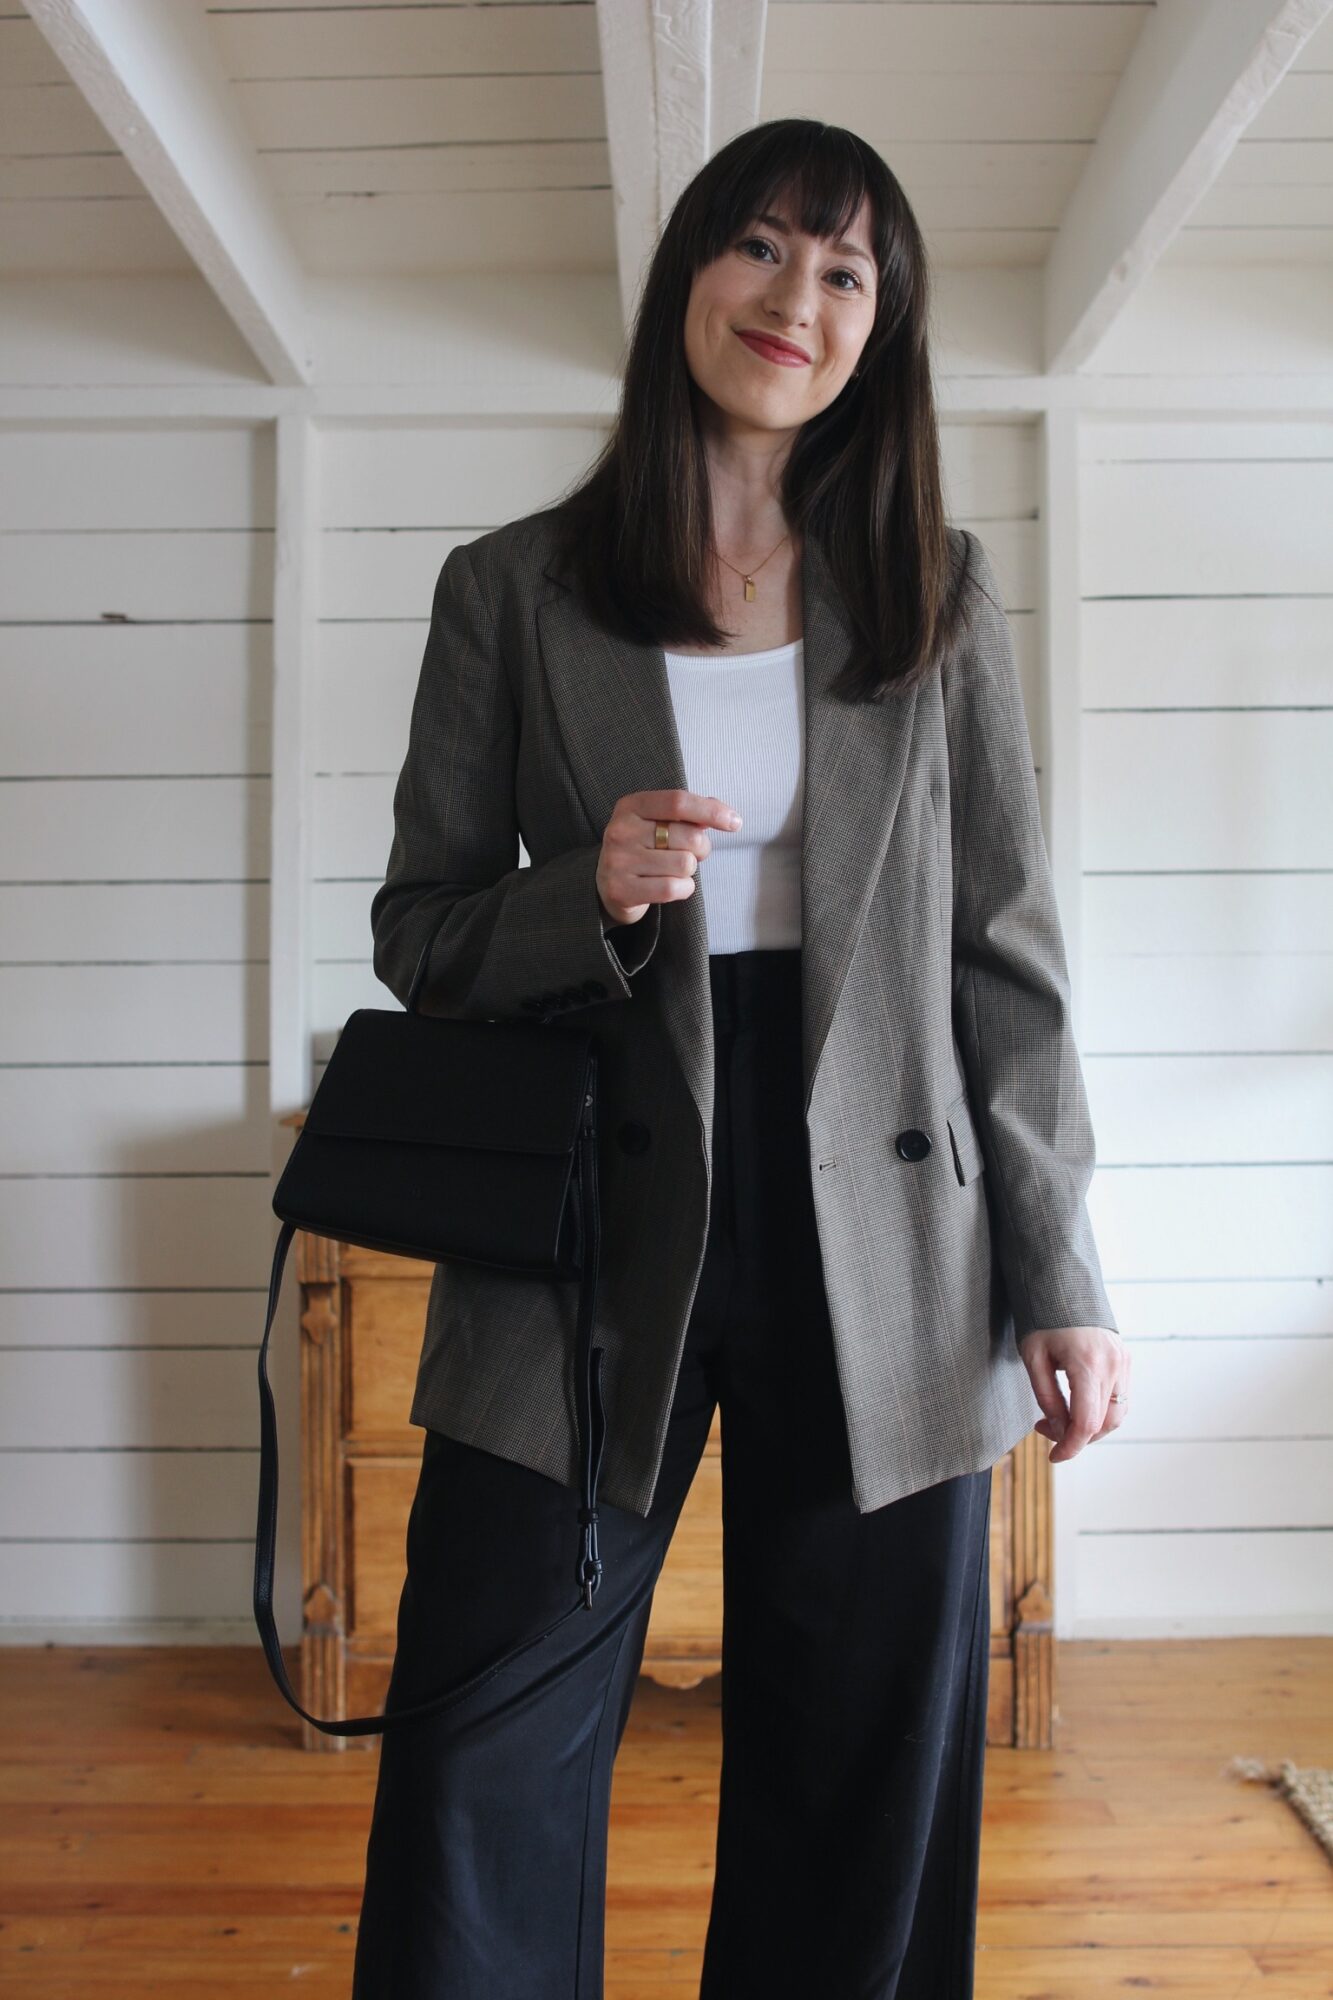 STYLE BEE - BROWN BLAZER, WHITE TEE, TROUSERS AND POINTED FLATS